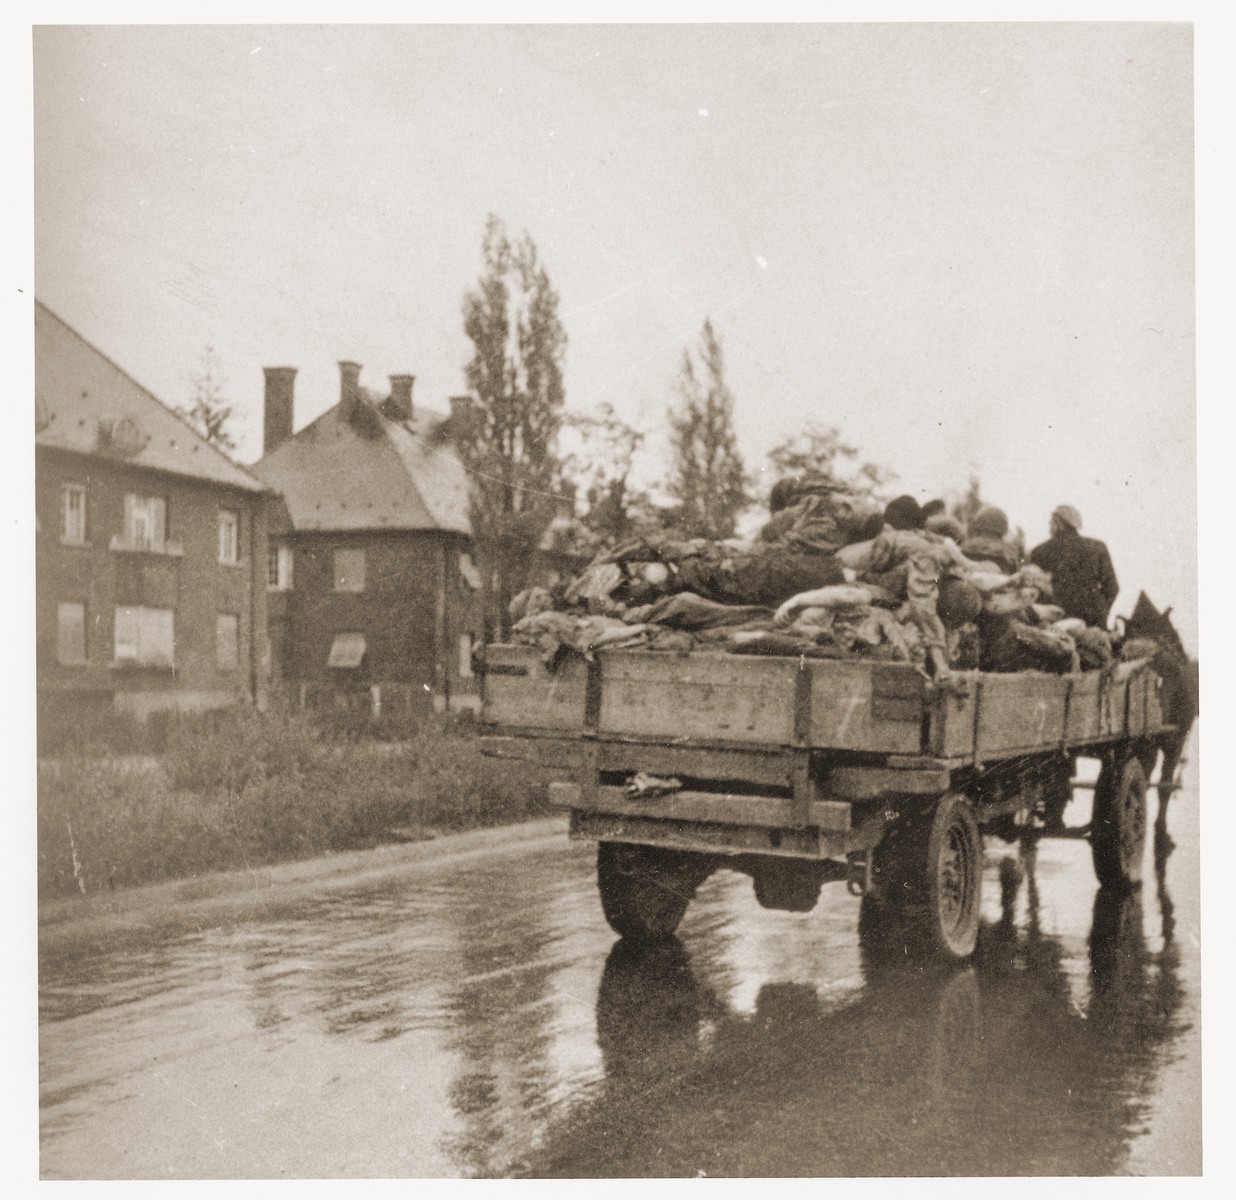 Wagons laden with corpses leave the Dachau concentration camp en route to a burial site.  Allied authorities required local farmers to drive their loaded carts through the town of Dachau as an education for the inhabitants.